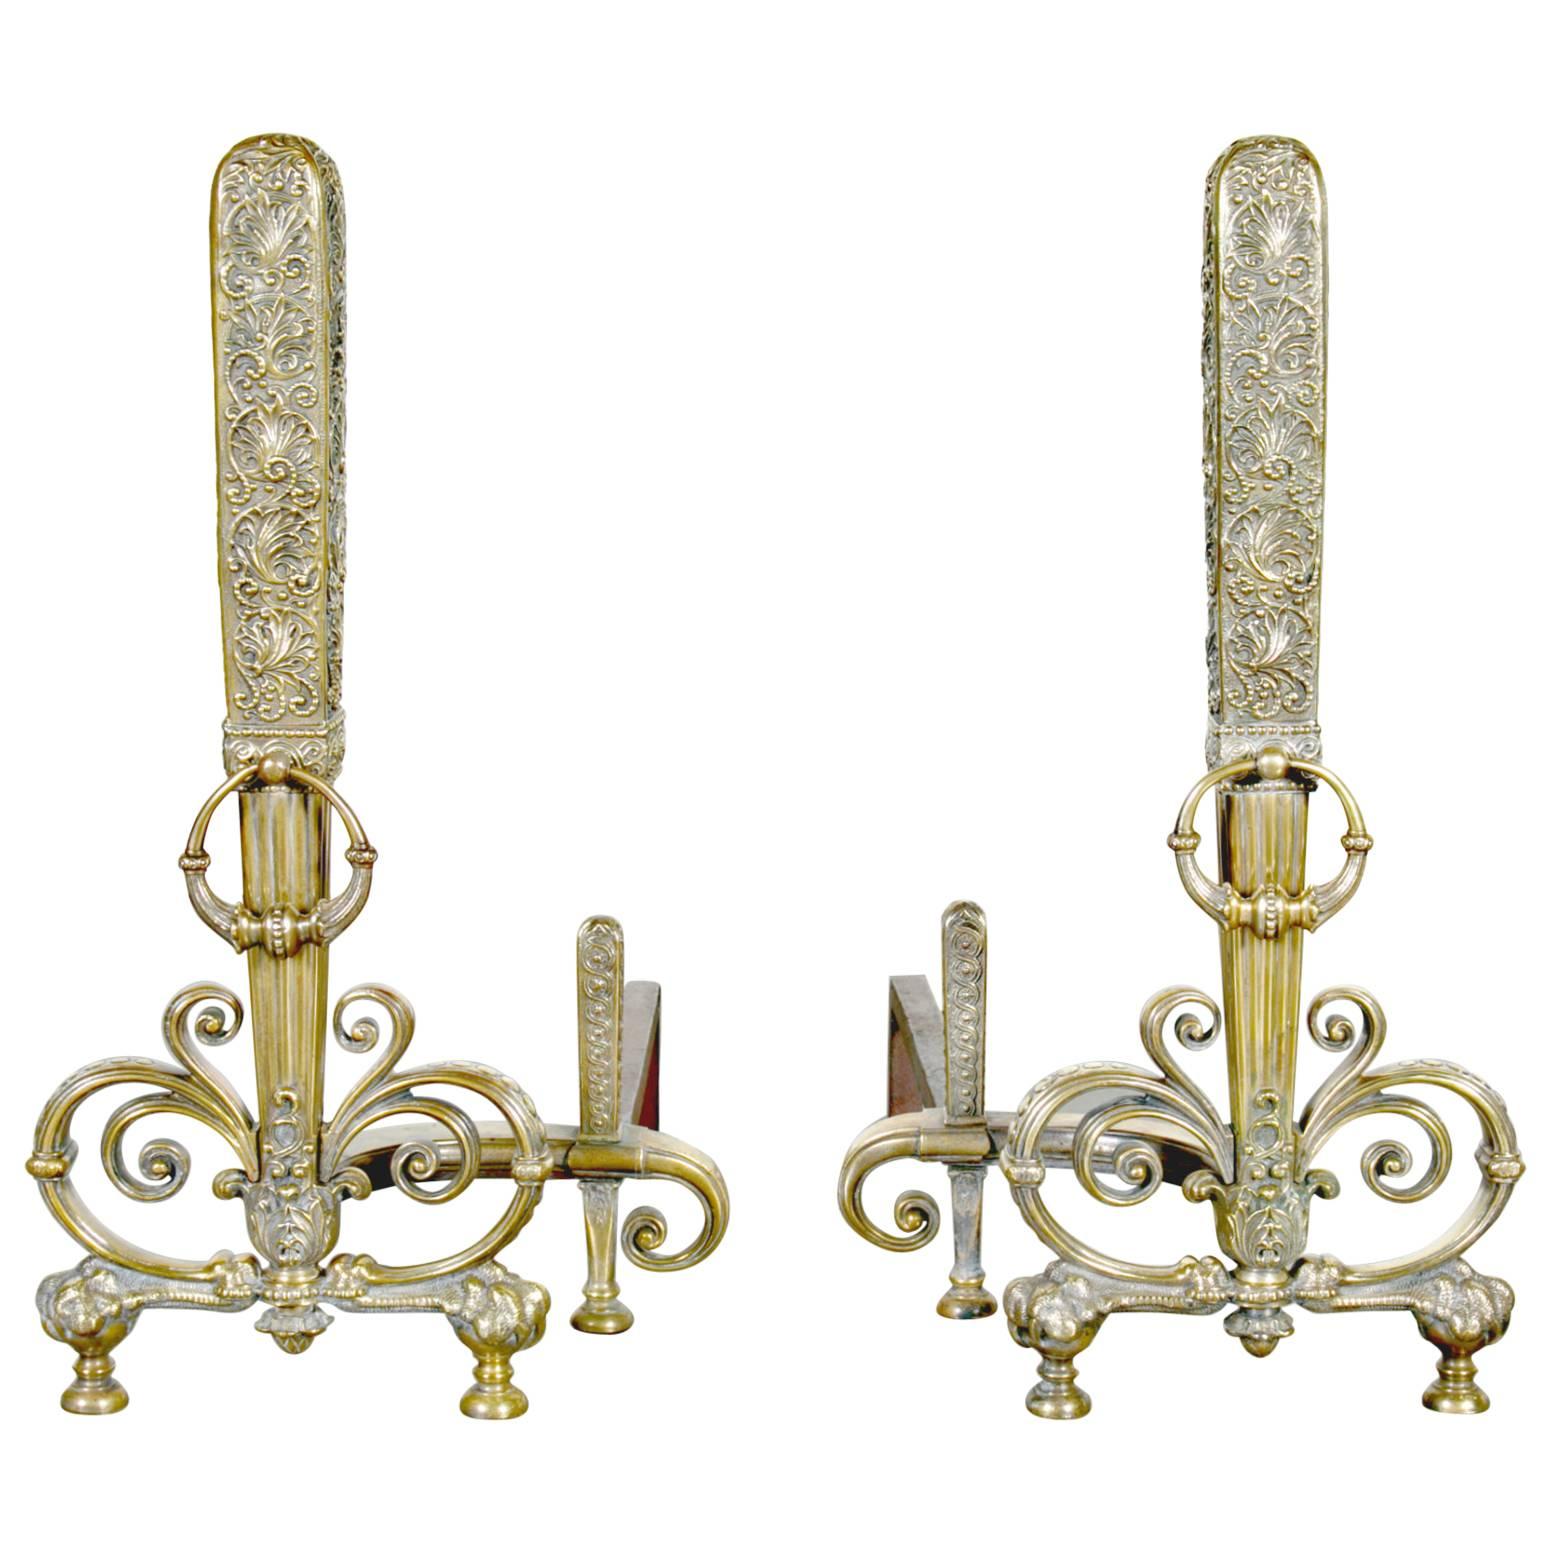 Fine Pair of Brass and Wrought Iron Andirons Attributed to Tiffany Studios